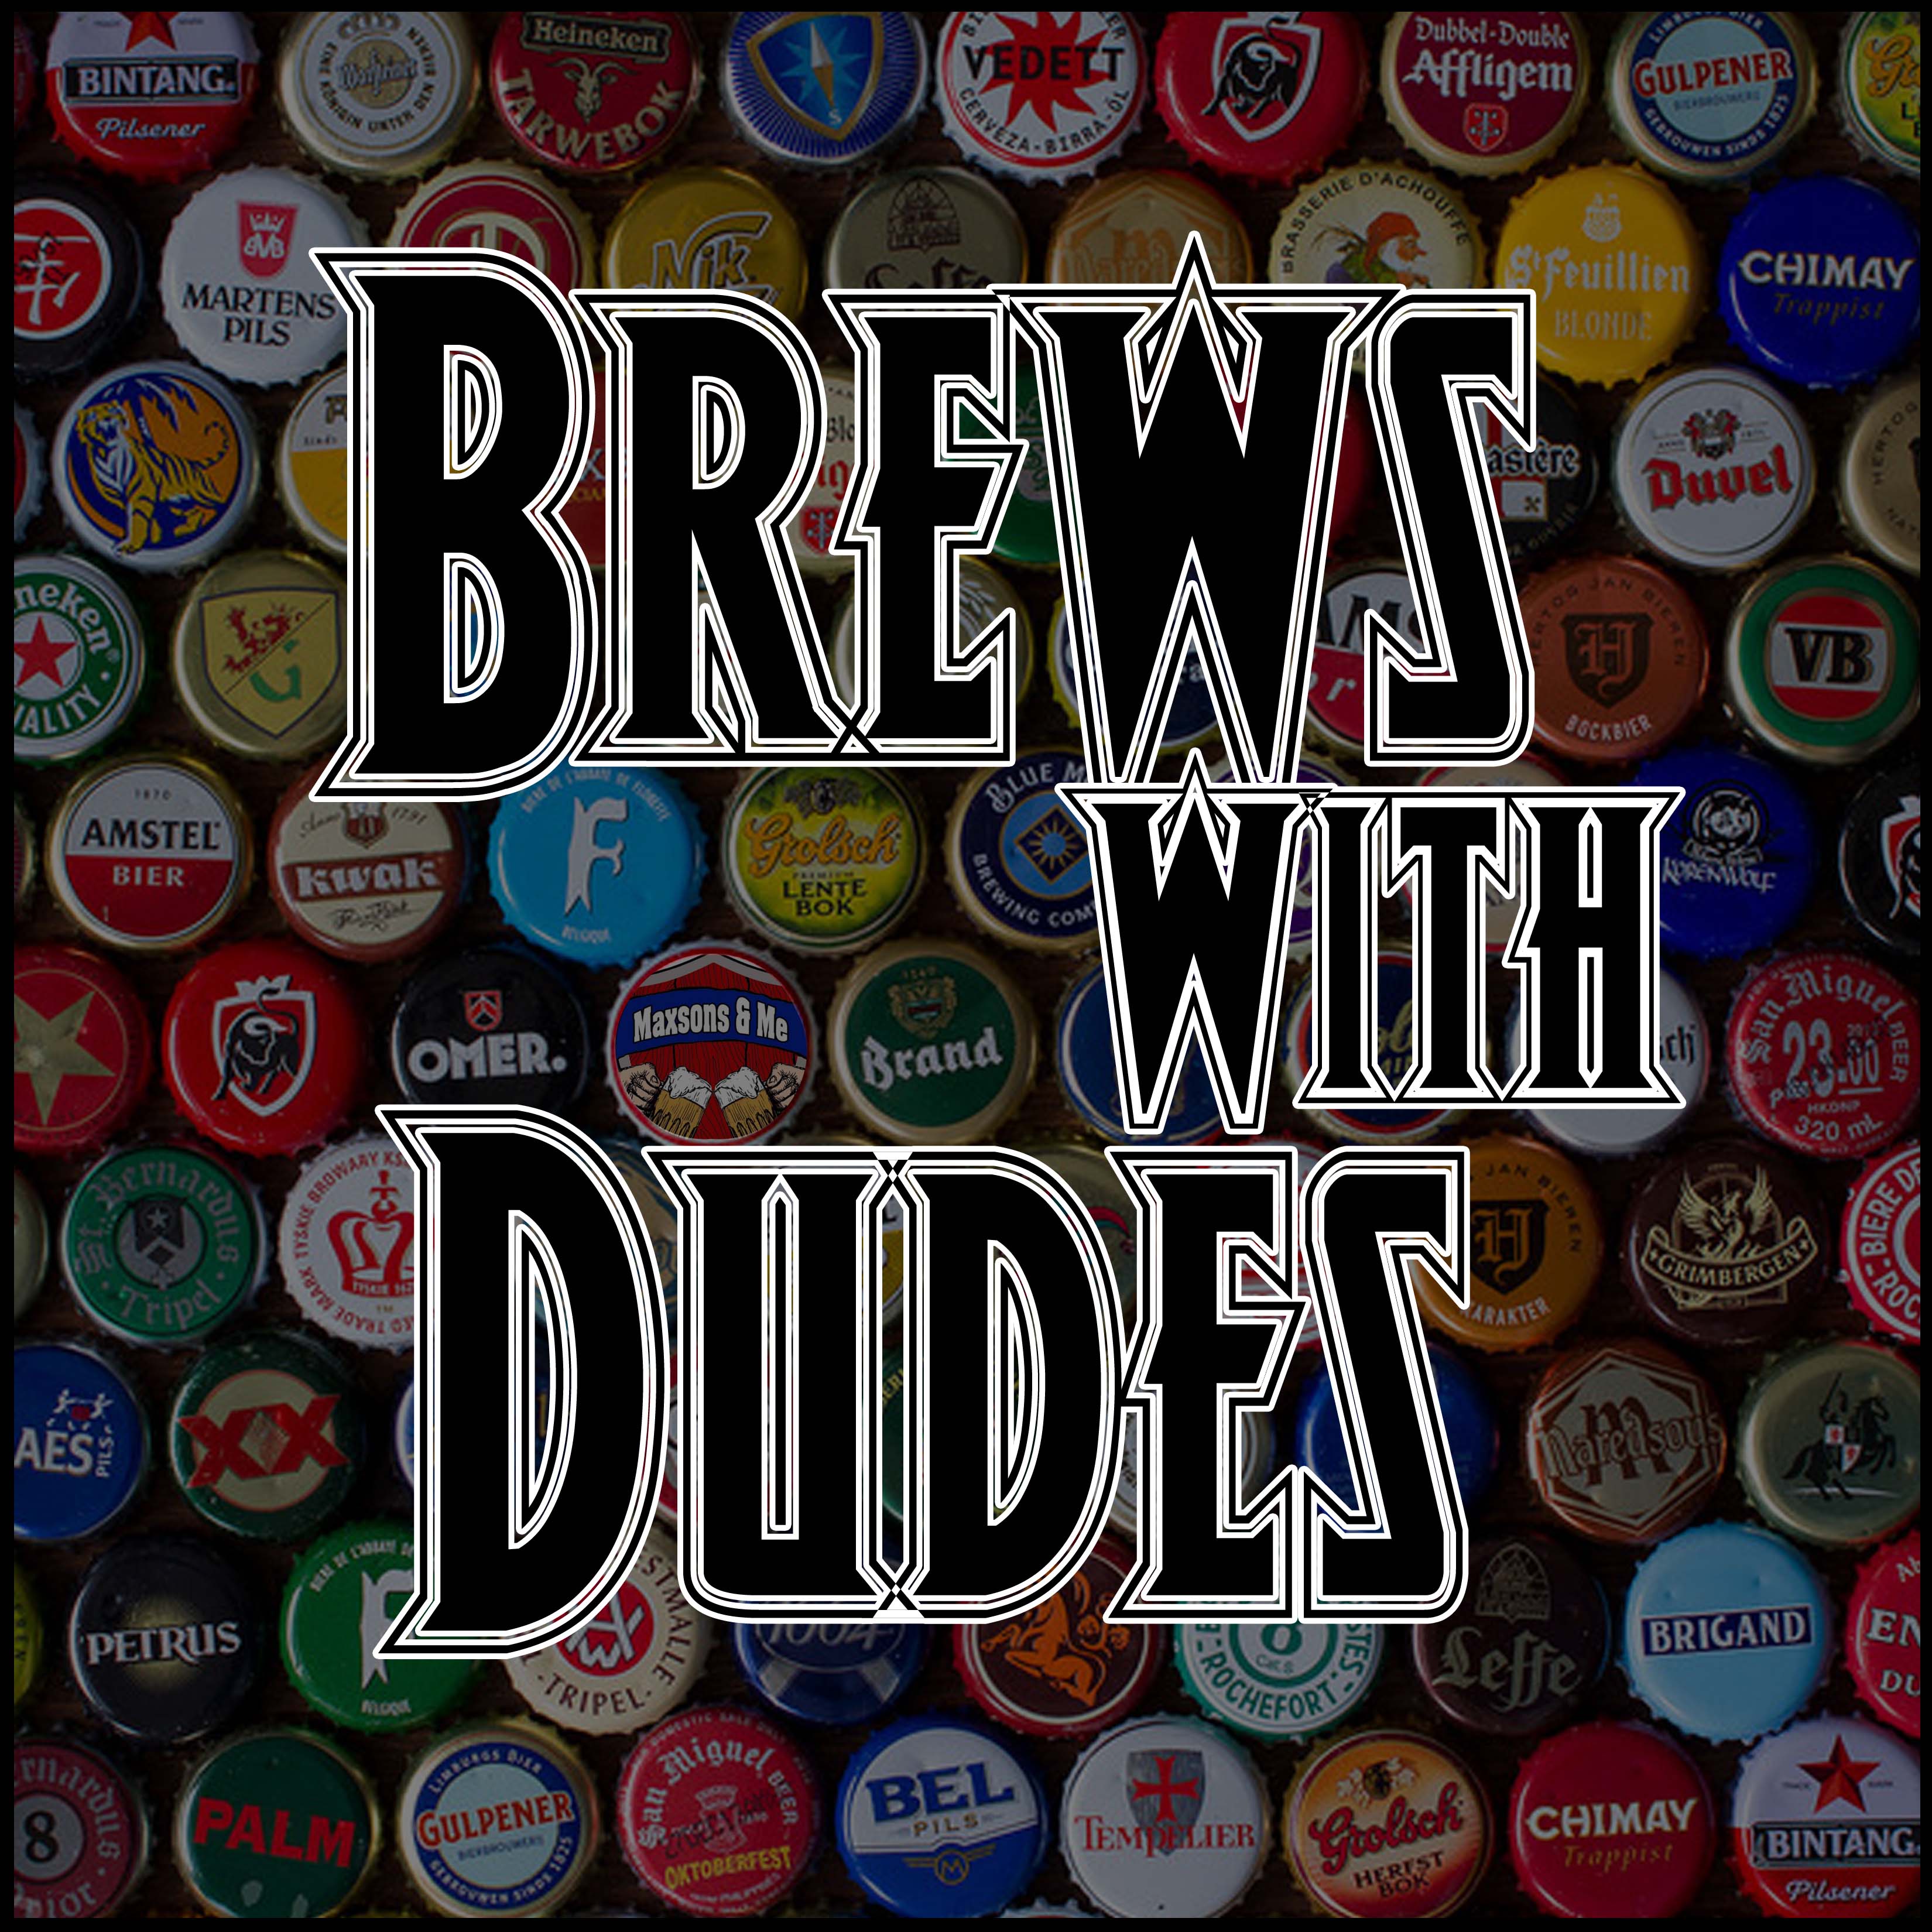 Brews With Dudes 005 - A Dad, a Taxman, and a Foggy Geezer